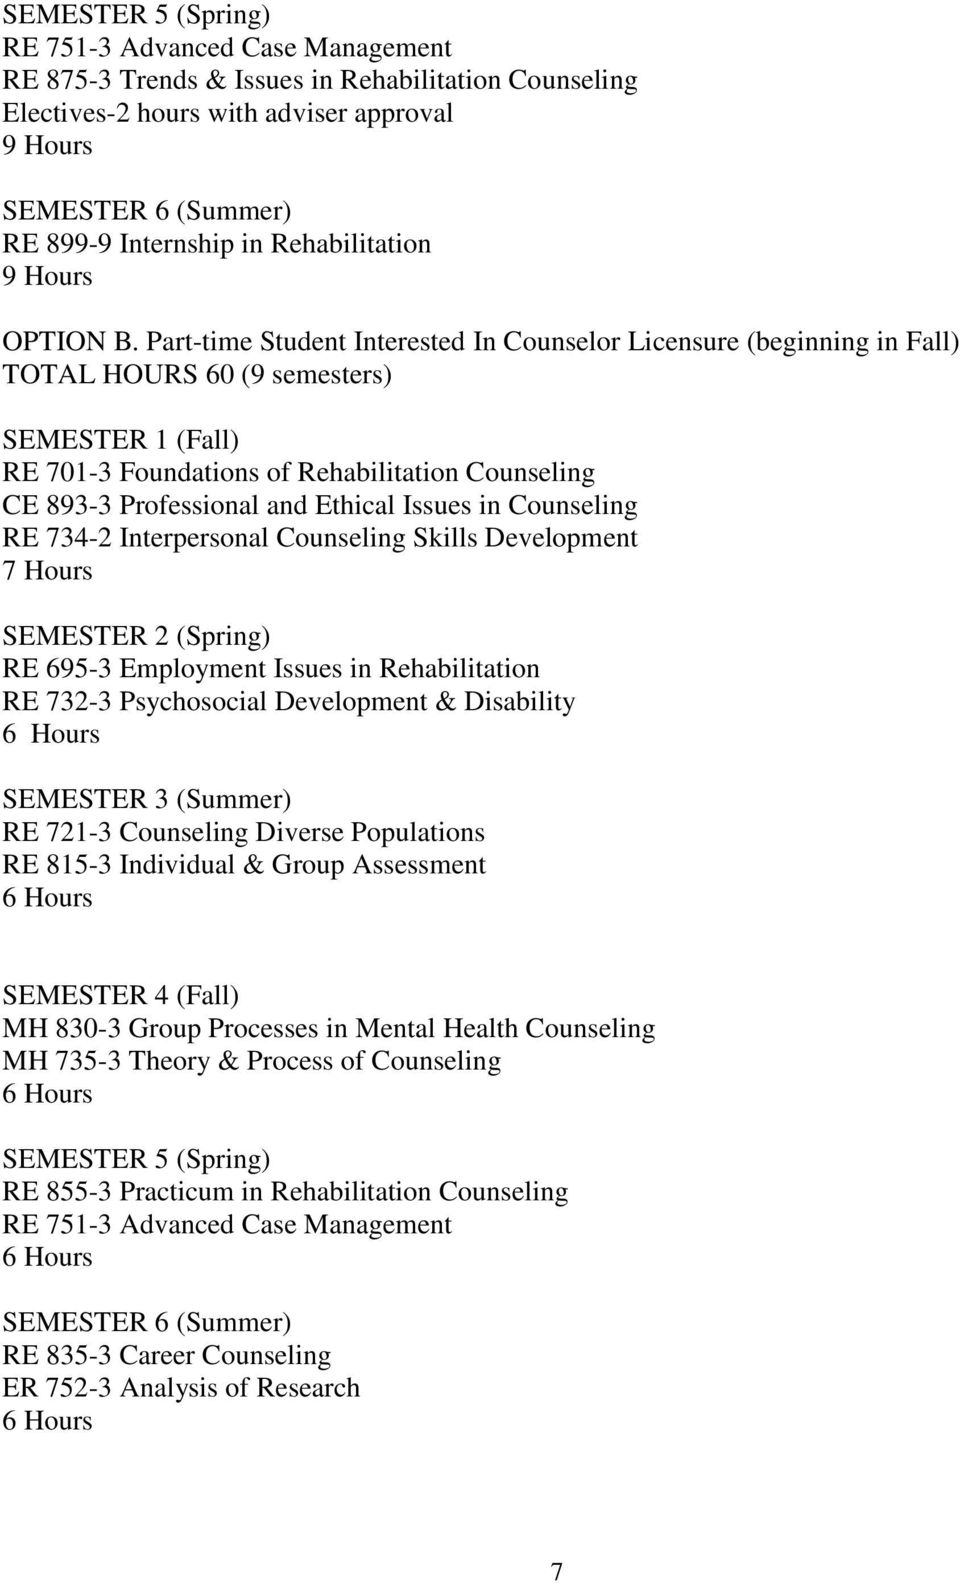 Part-time Student Interested In Counselor Licensure (beginning in Fall) TOTAL HOURS 60 (9 semesters) SEMESTER 1 (Fall) RE 701-3 Foundations of Rehabilitation Counseling CE 893-3 Professional and